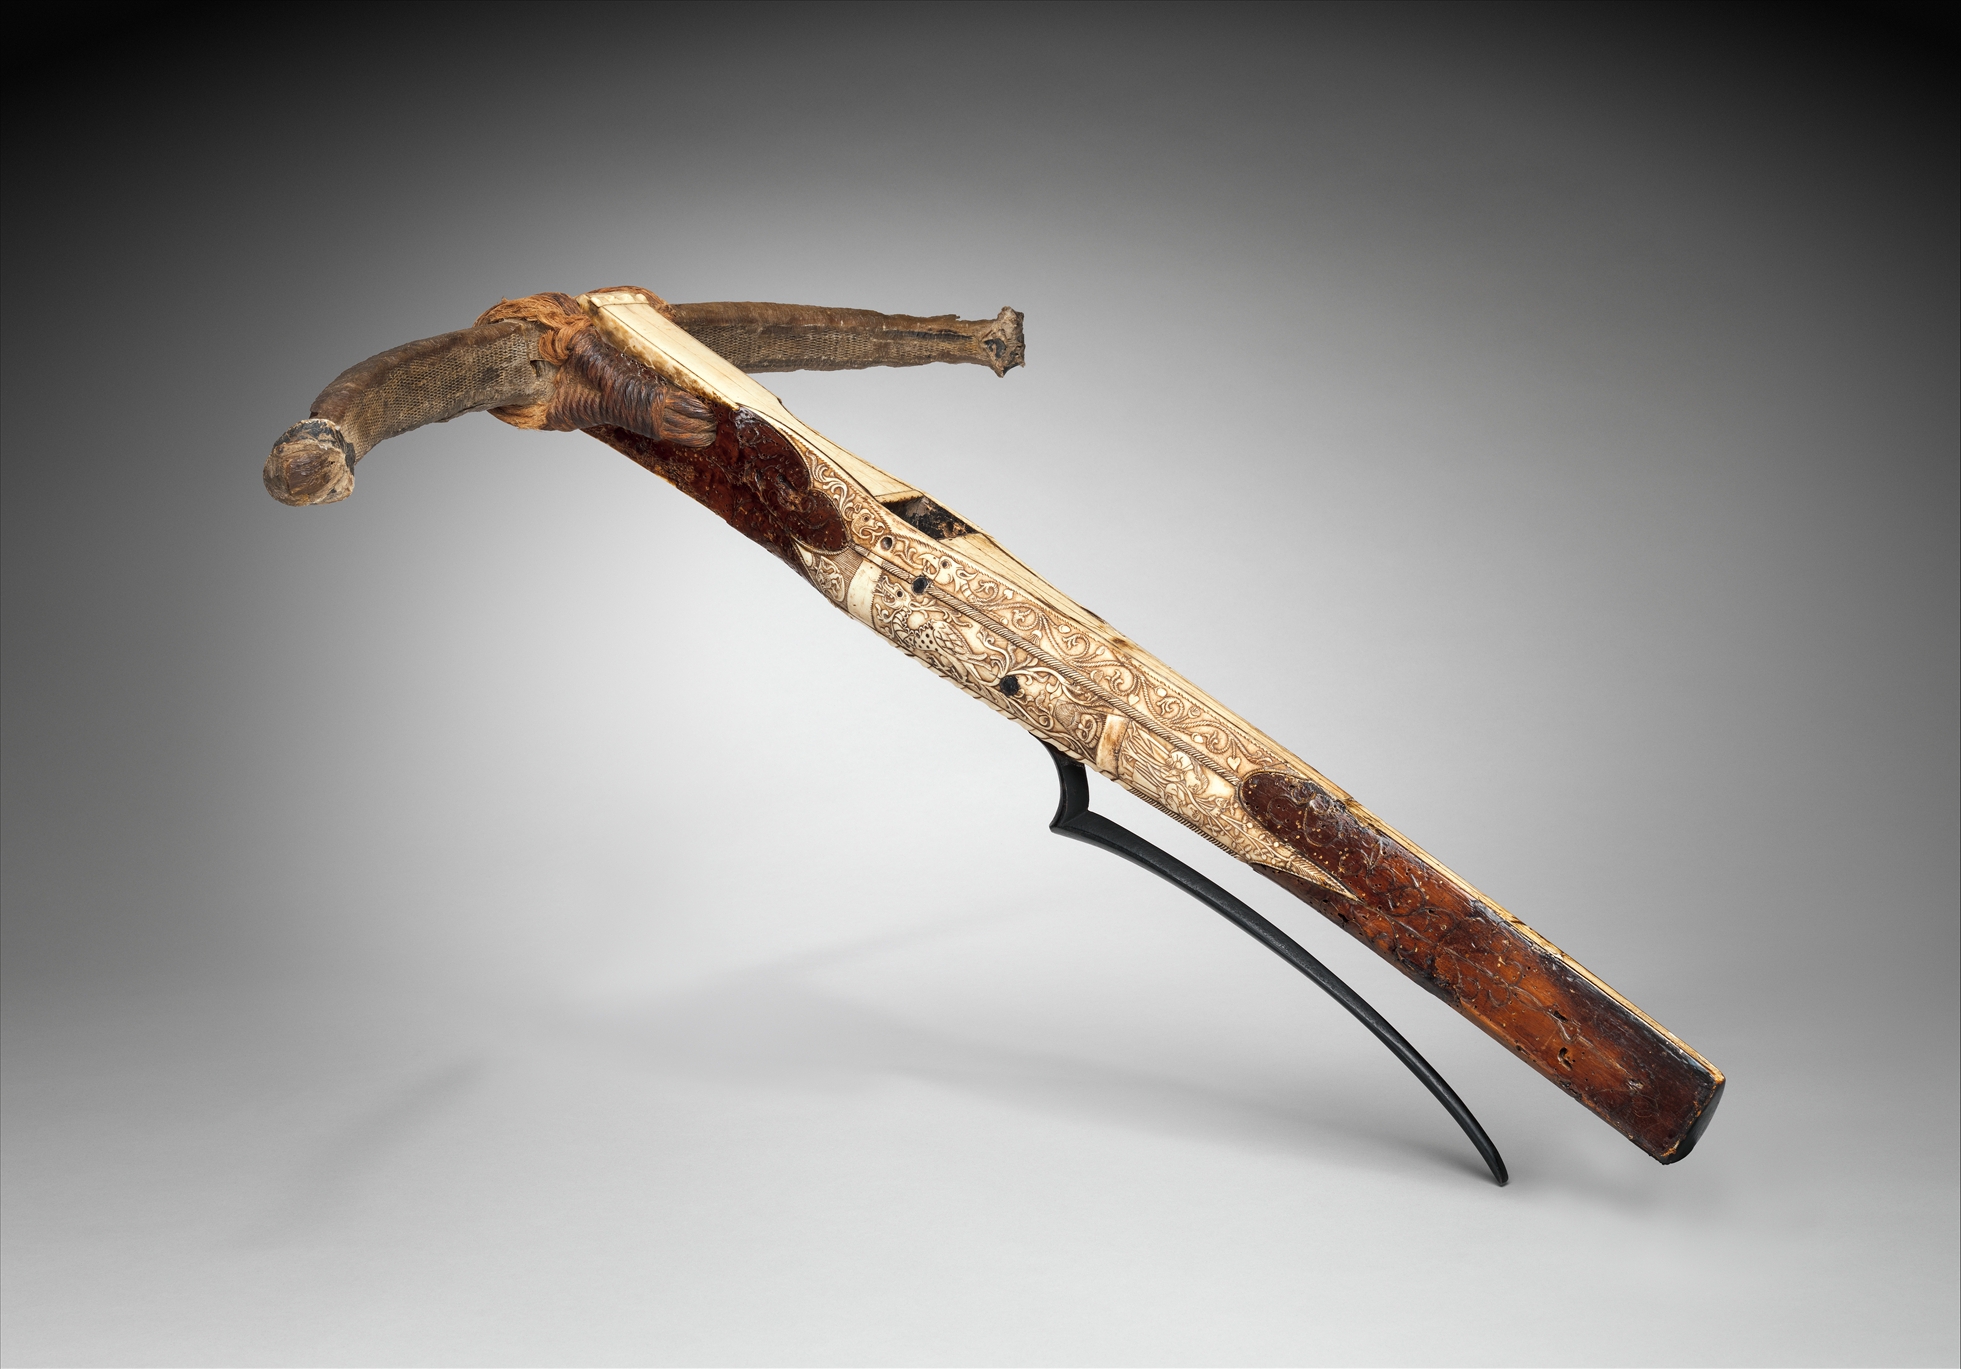 King Mathias' Crossbow Has Been on Display in New York for 100 Years